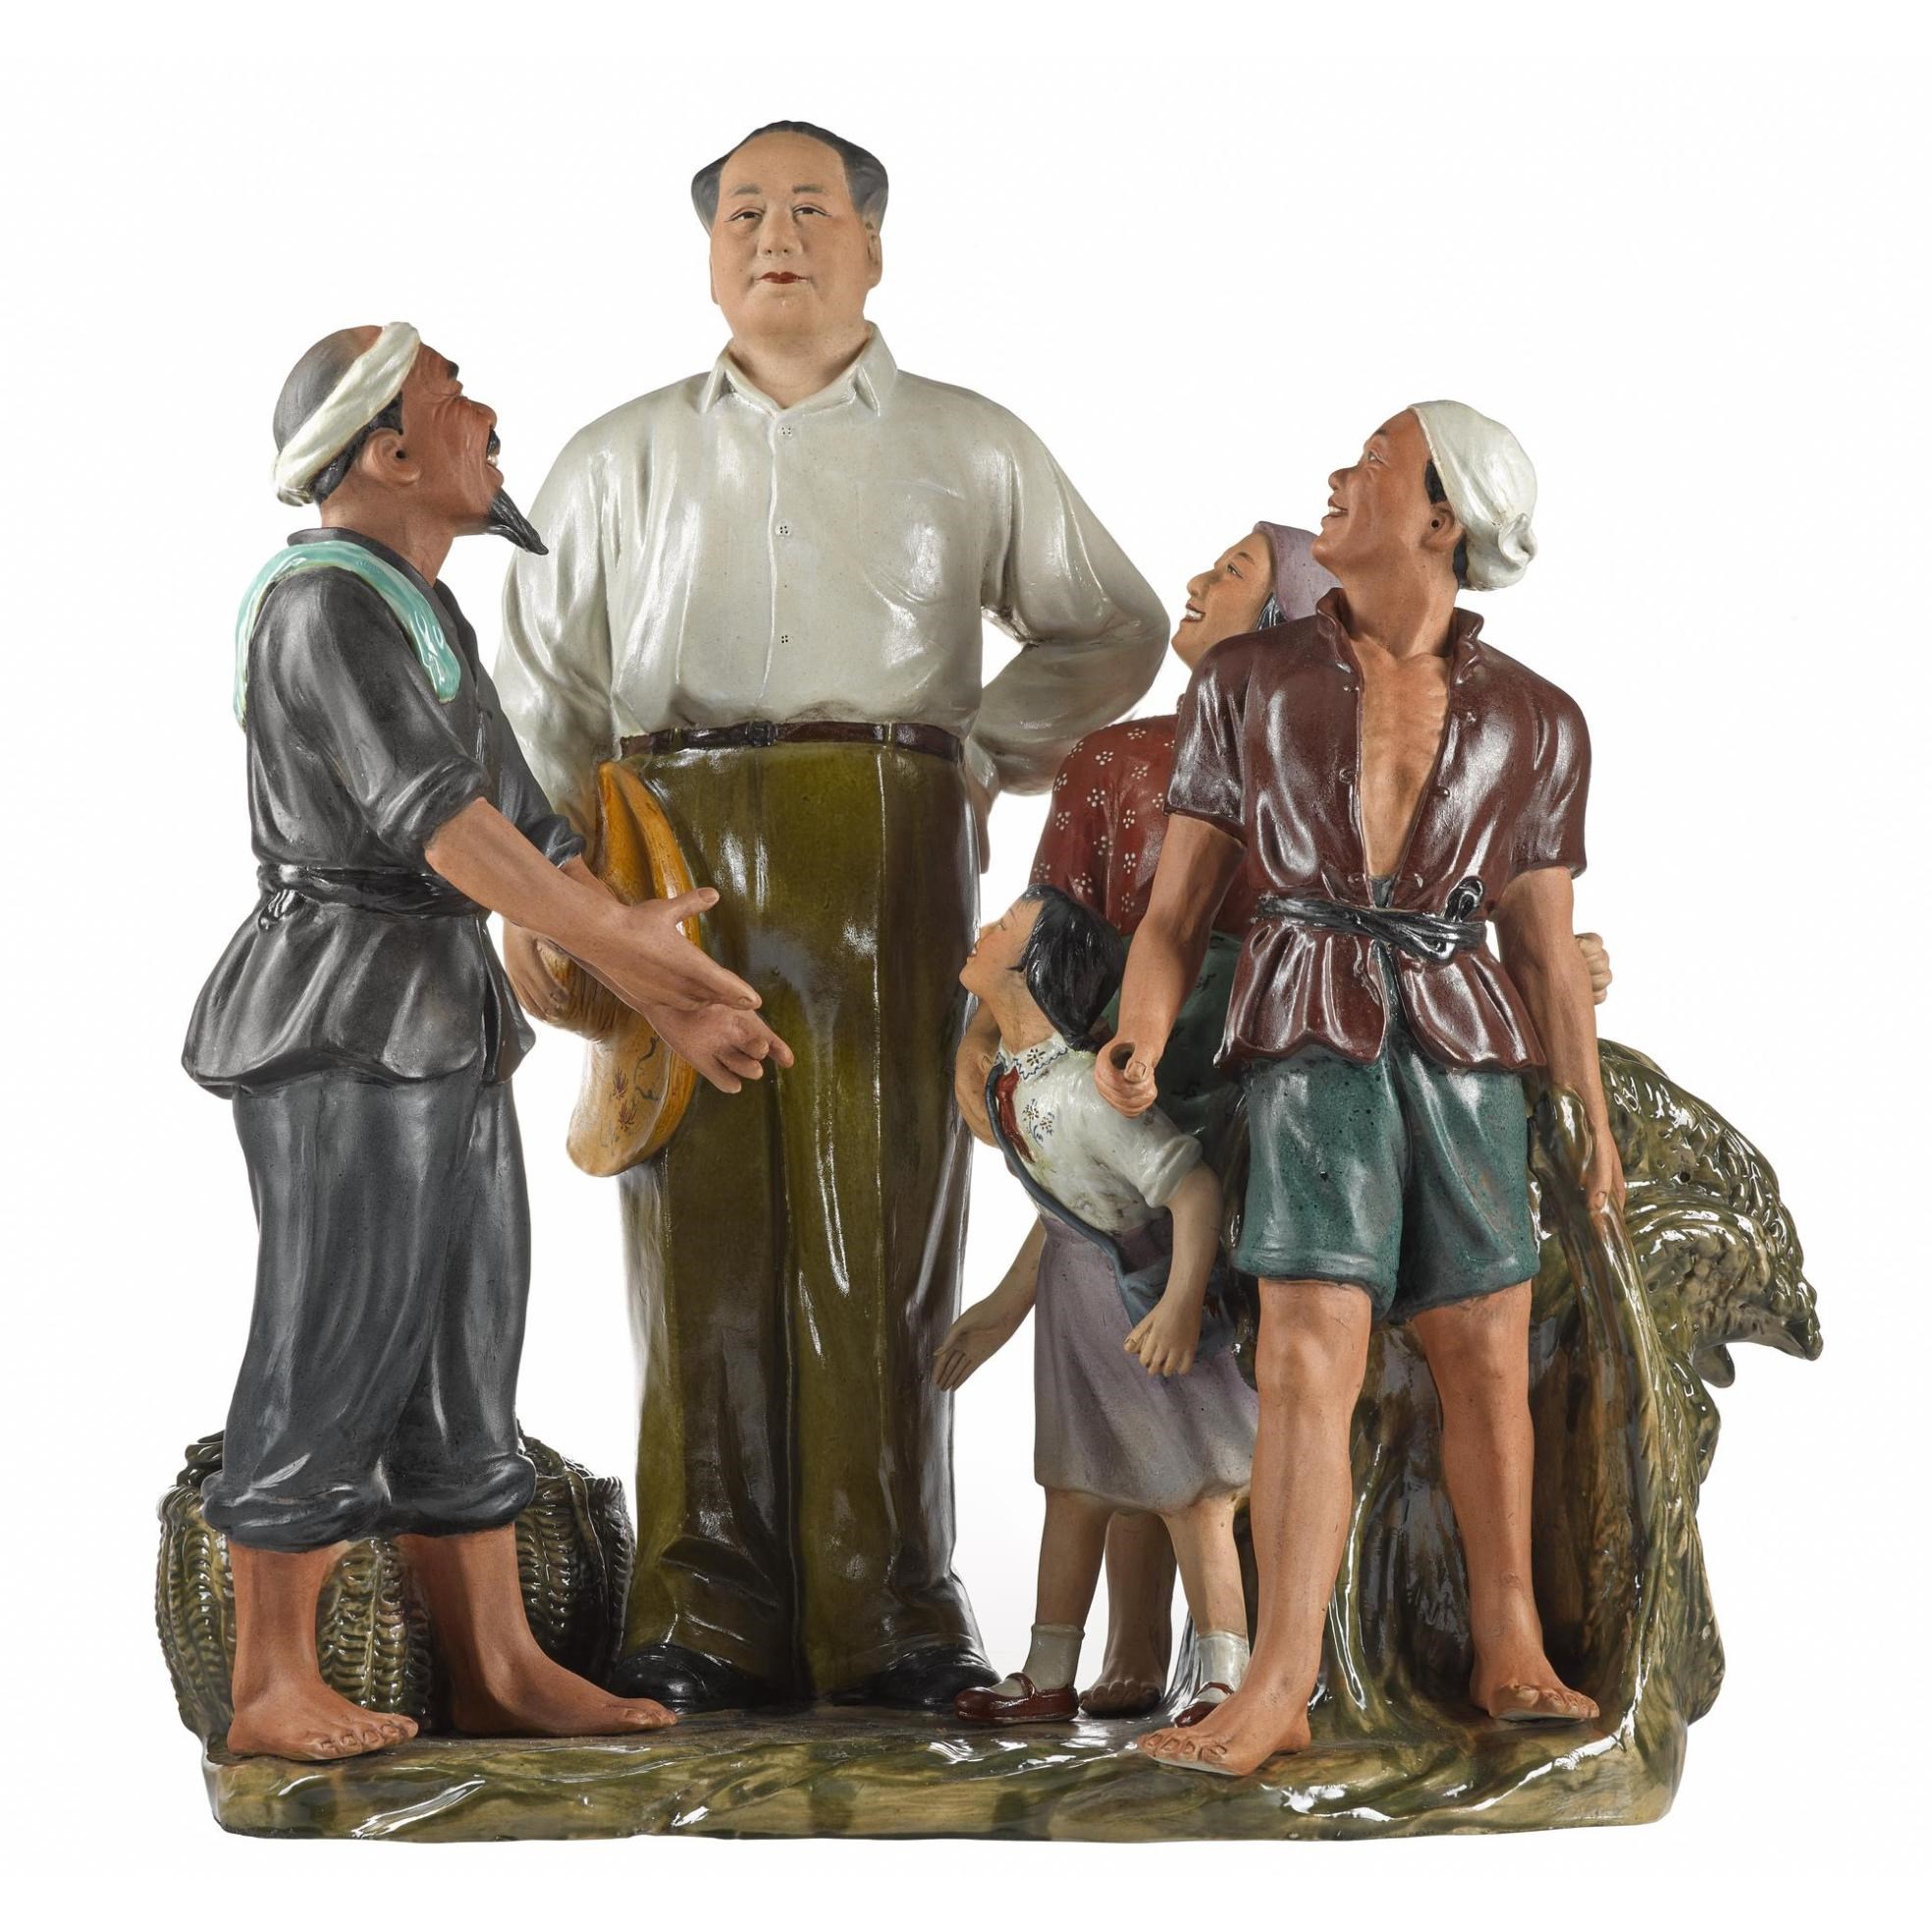 Porcelain figure group of people looking up at Mao Zedong